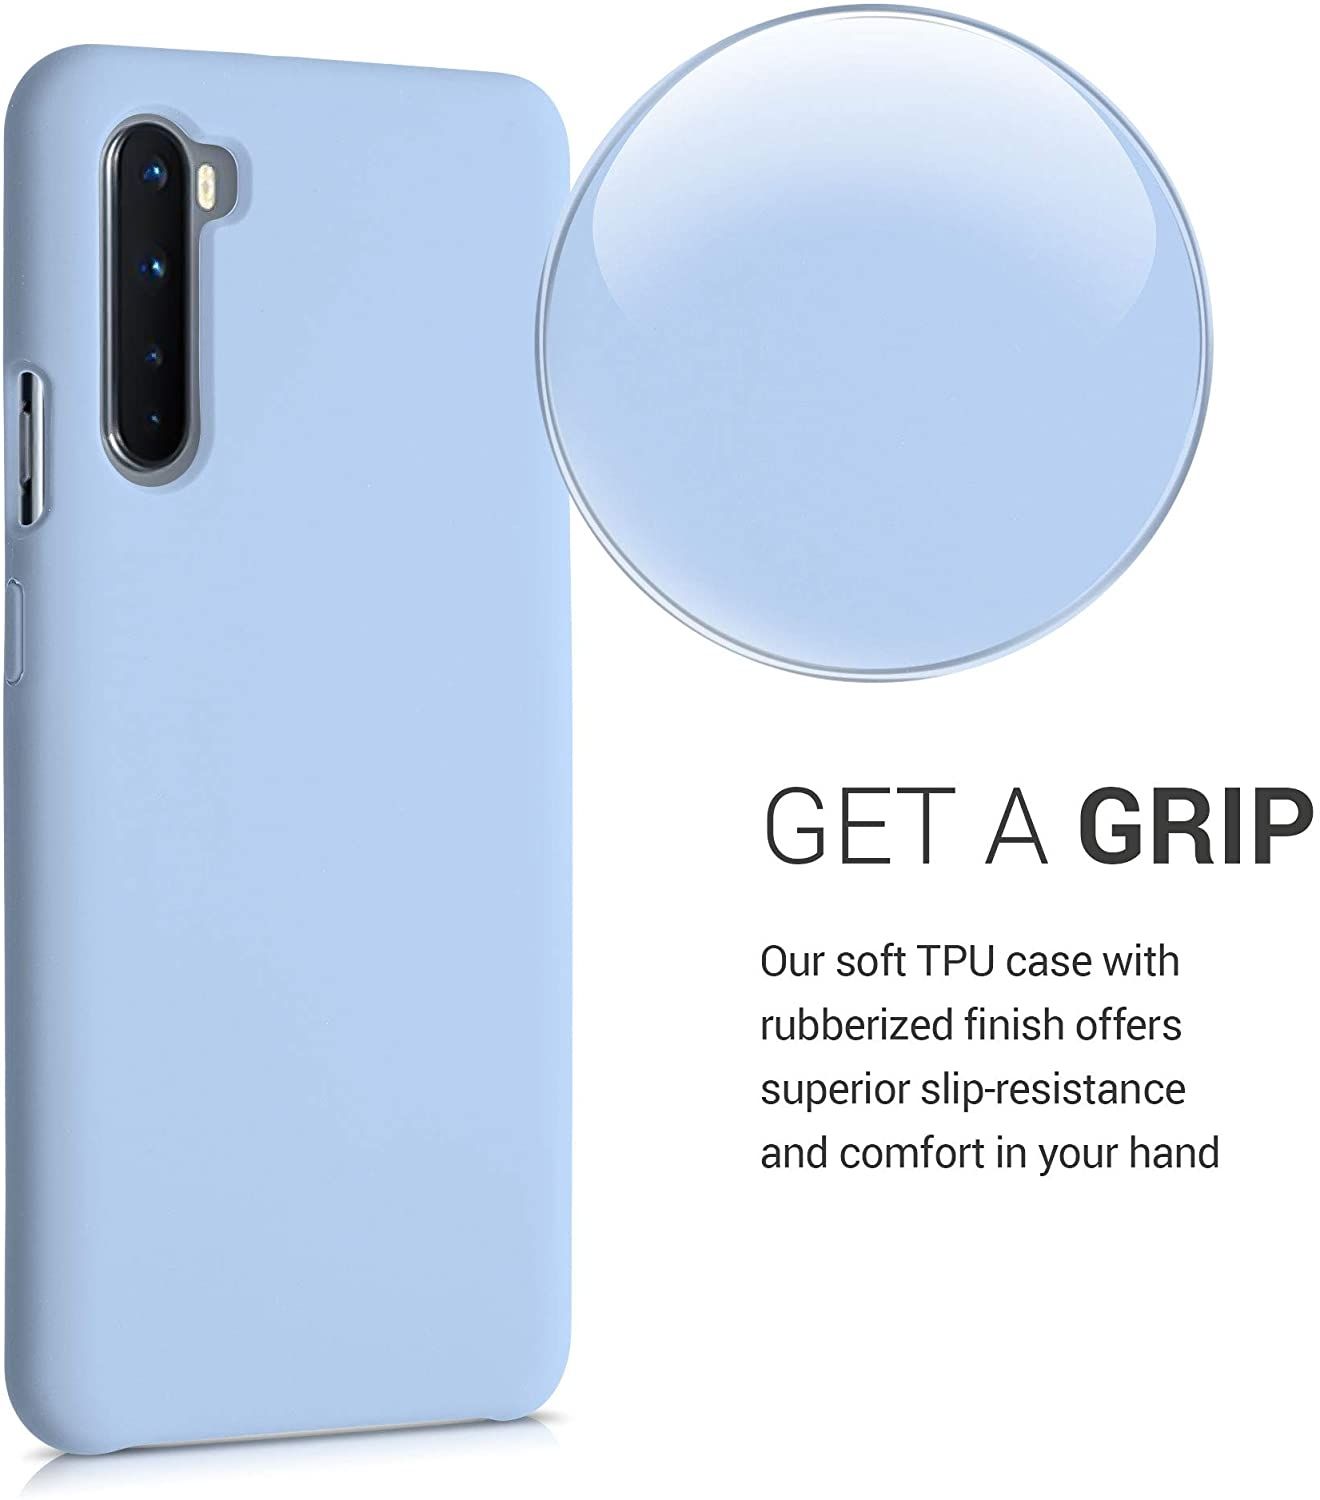 kw-mobile-thiki-silikonis-oneplus-nord-soft-flexible-cover-light-blue-matte-51871.58-2.jpg